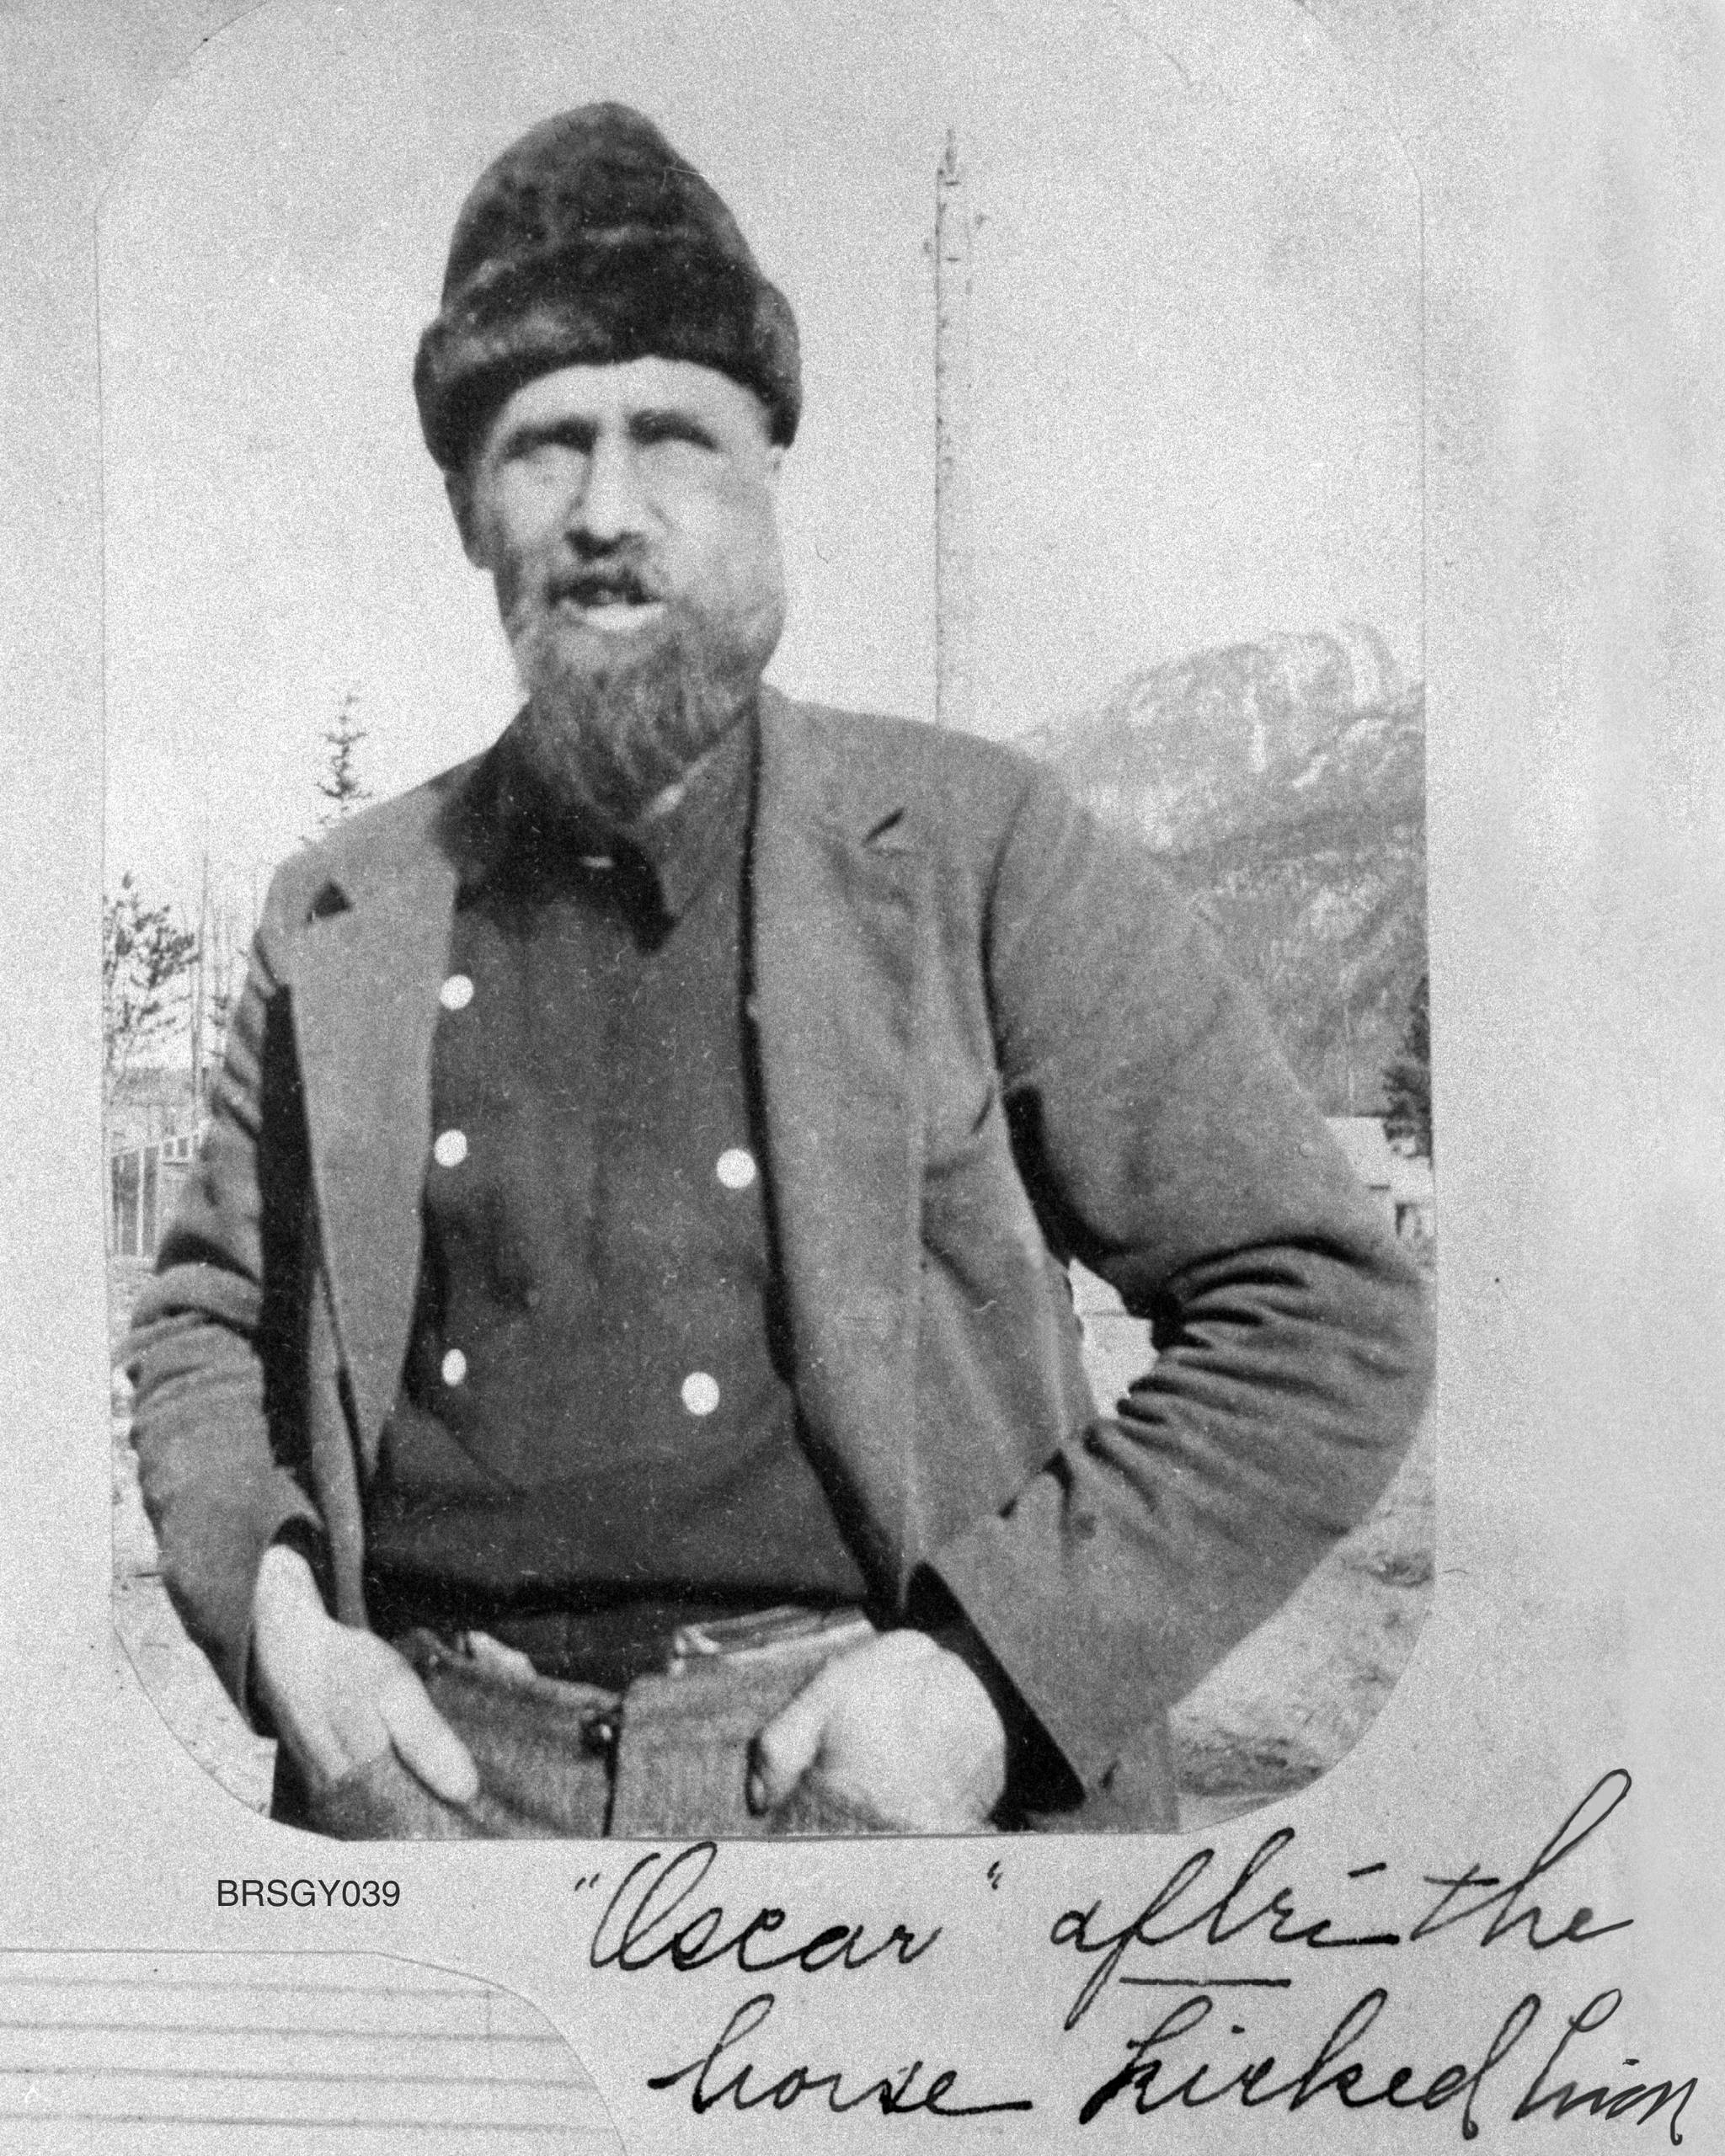 “Oscar after the horse kicked him,” looking north. (Courtesy Photo | National Park Service, Klondike Gold Rush National Historical Park, Brackett Family Collection, BRSGY039, KLGO SP-124-5195)